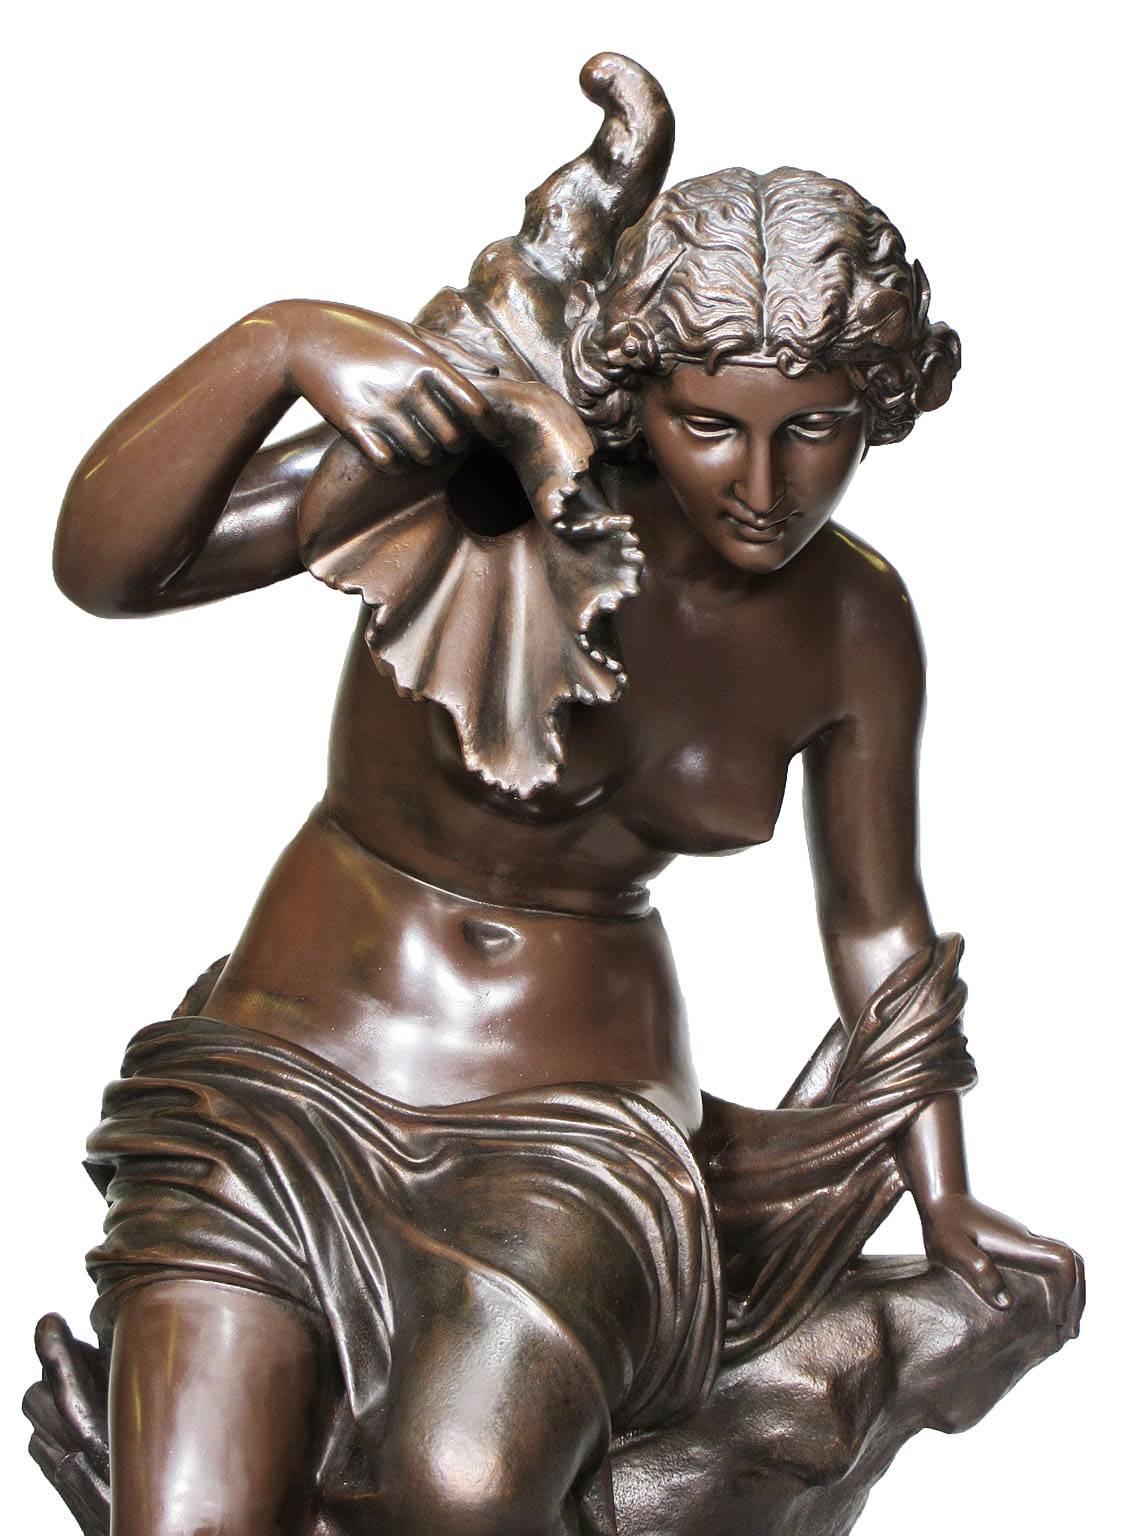 A Fine and Large French 19th Century Cast-Iron Fountain Figure Modeled as a Nude Maiden Seated on a Rocky Outcrop Holding a Cornucopia in Her Raised Right Hand, by J.J Ducel. Cast-Signed 